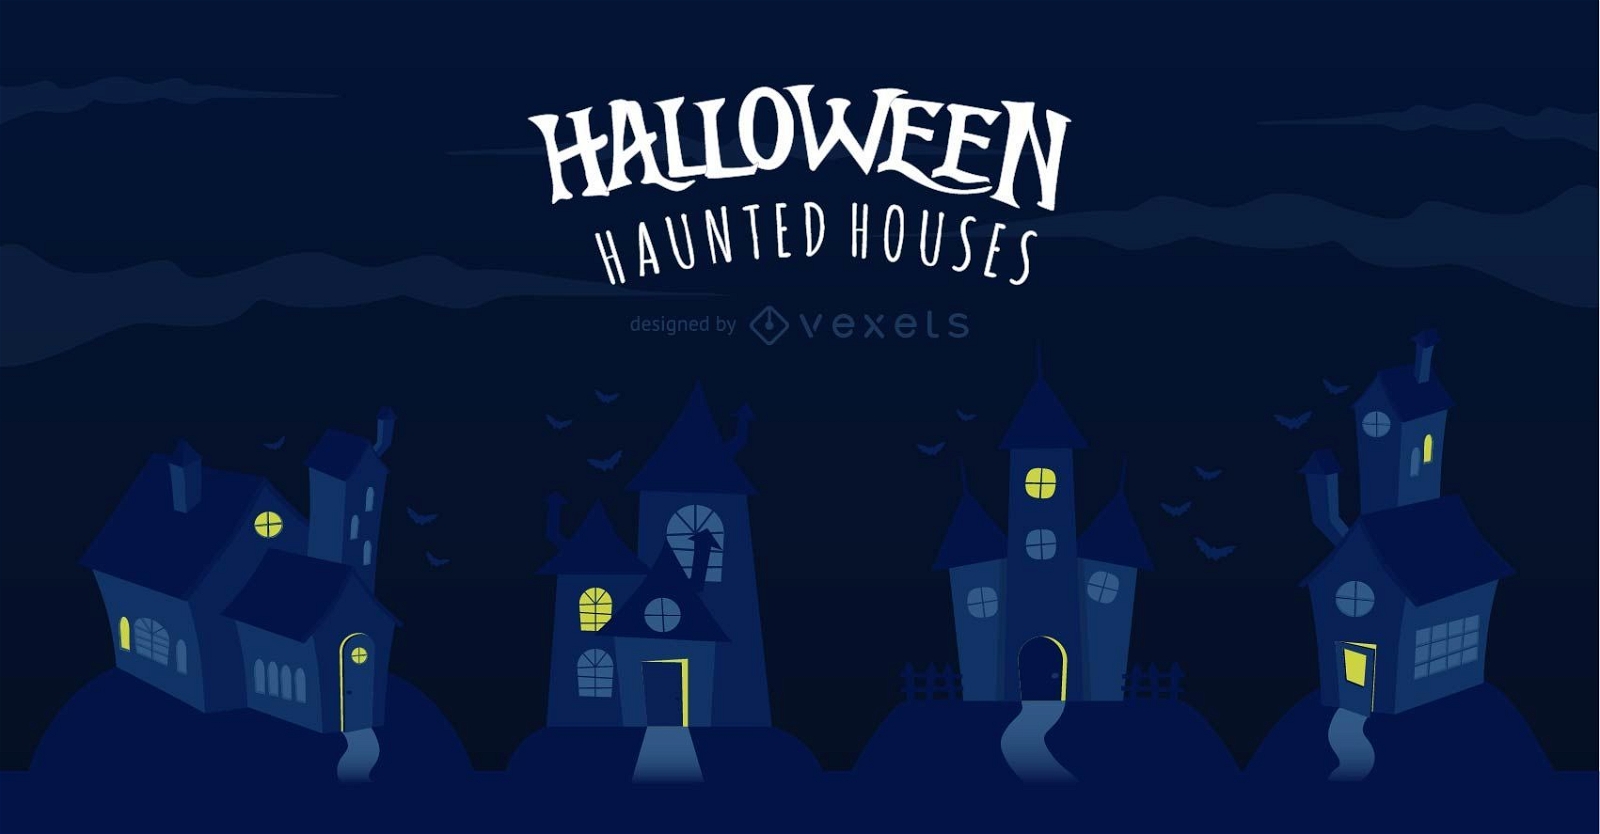 Chilling Halloween haunted houses